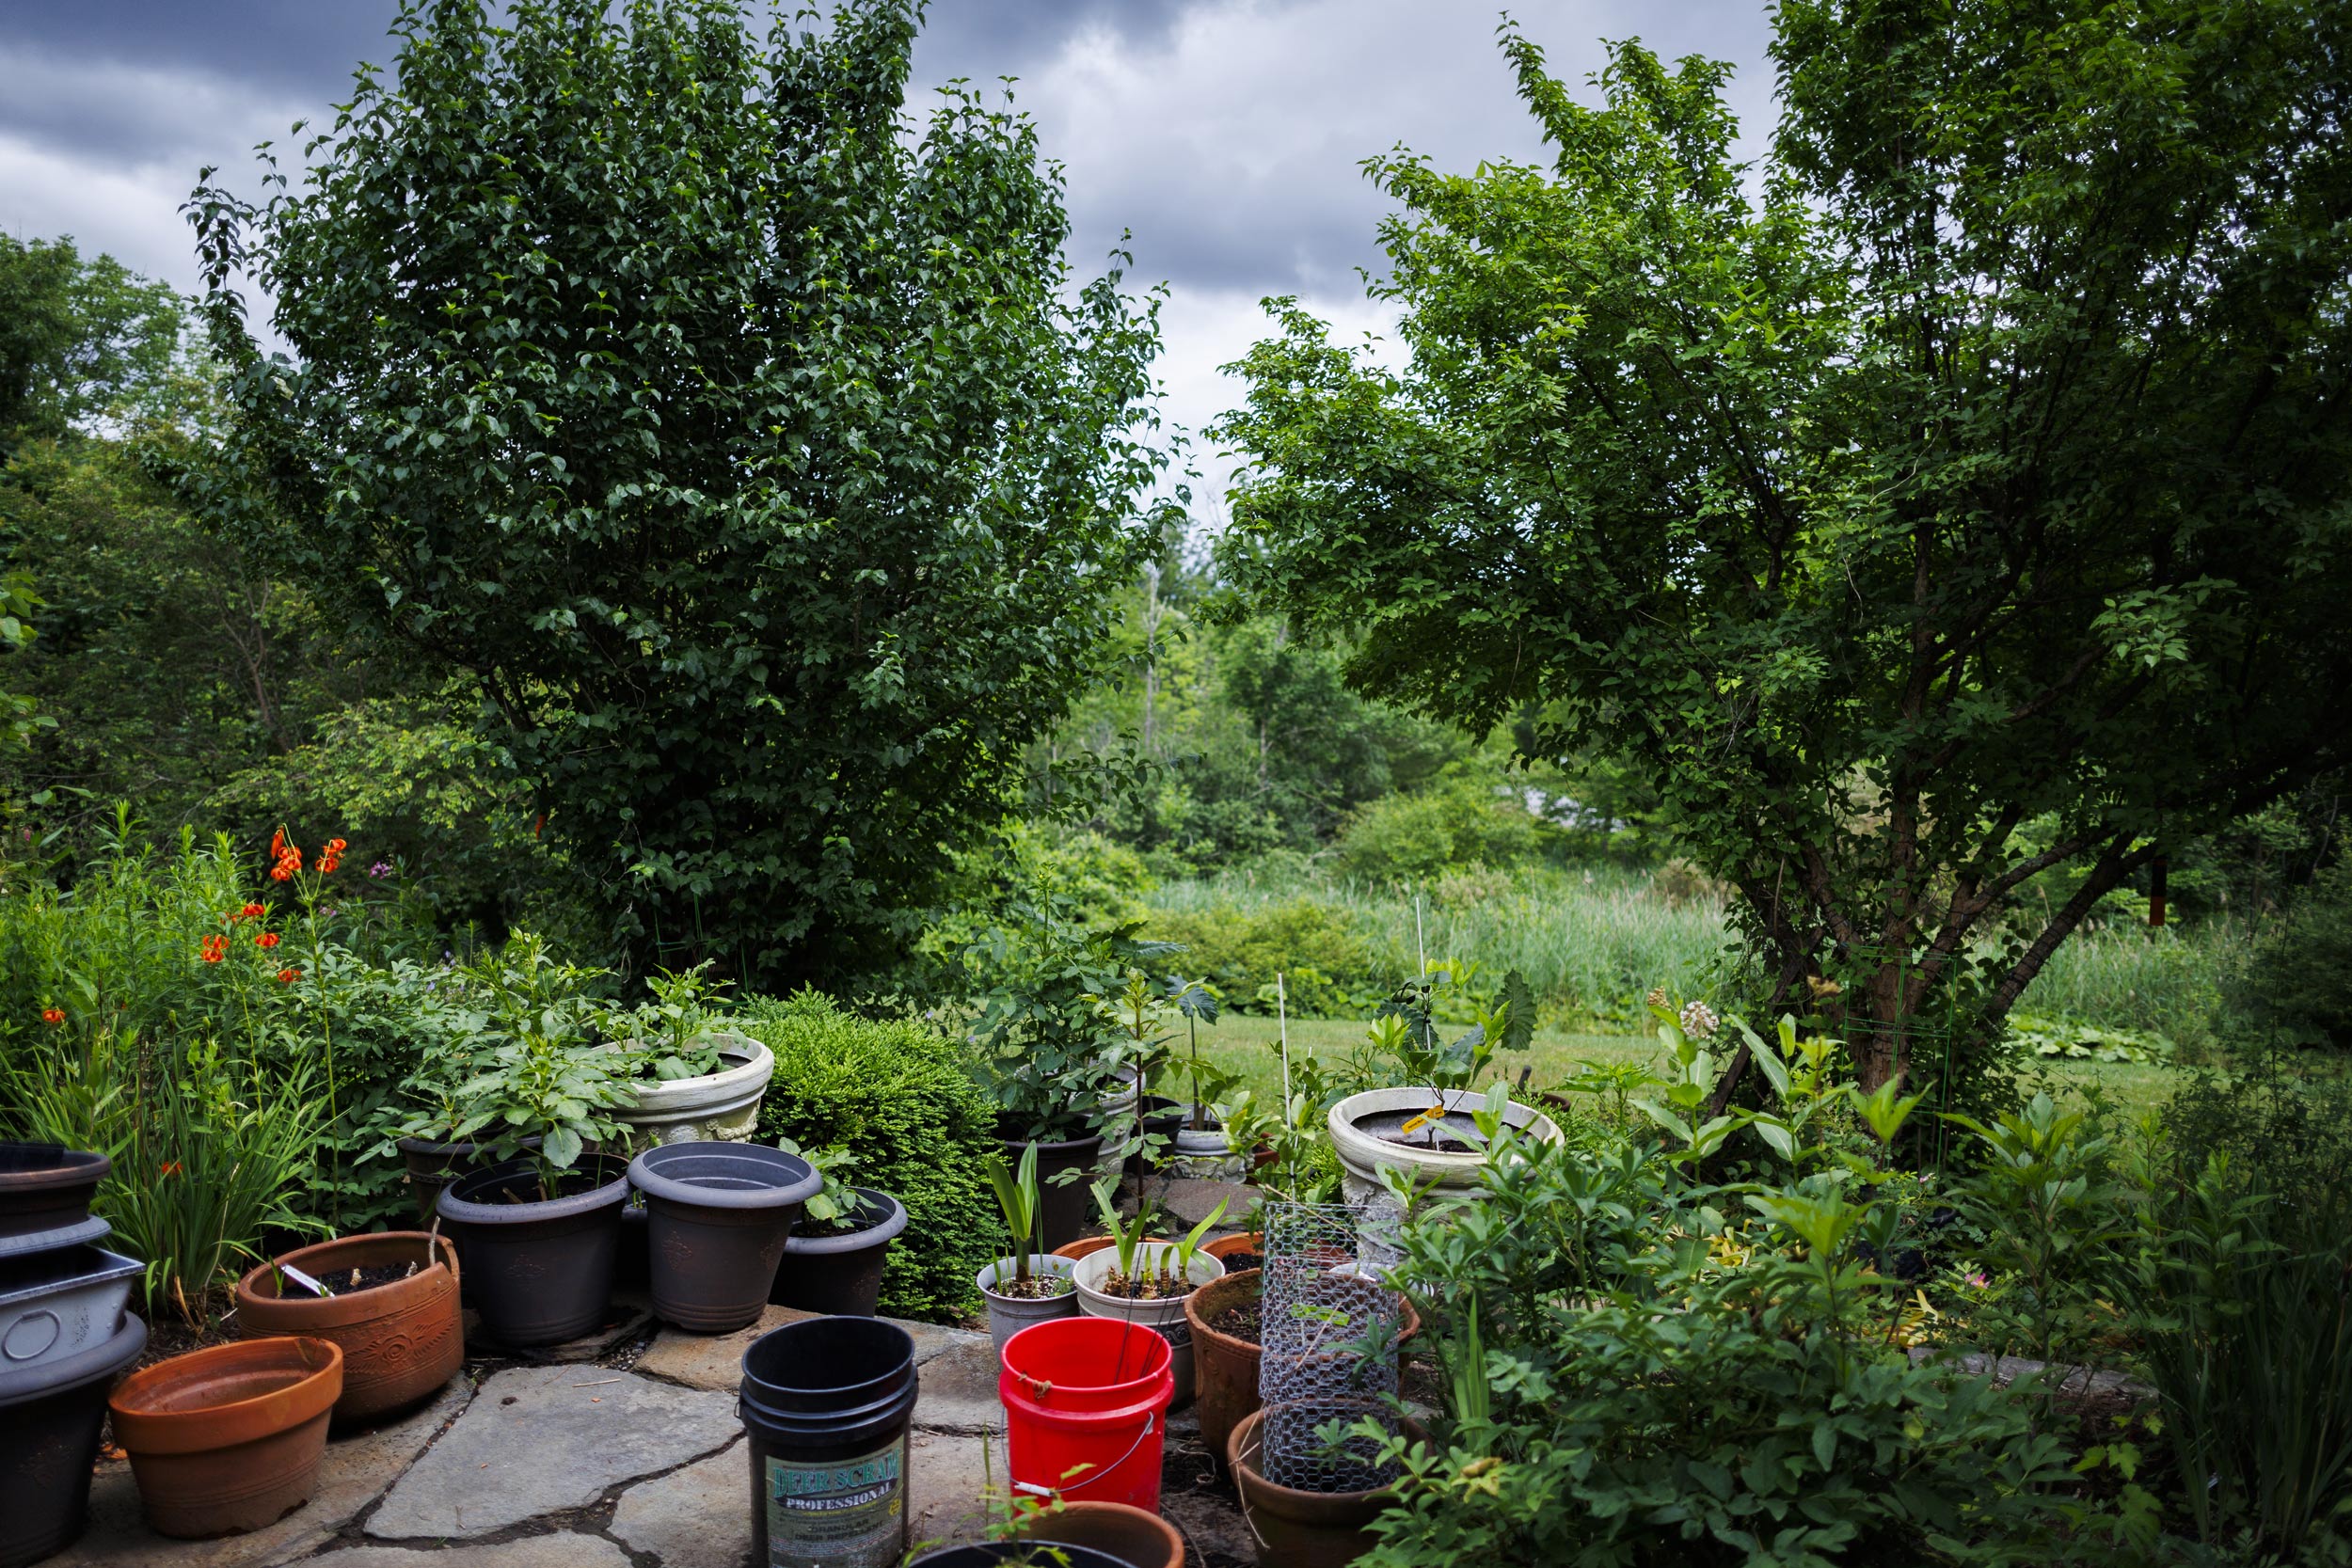 View of pots that start the path towards the garden. 